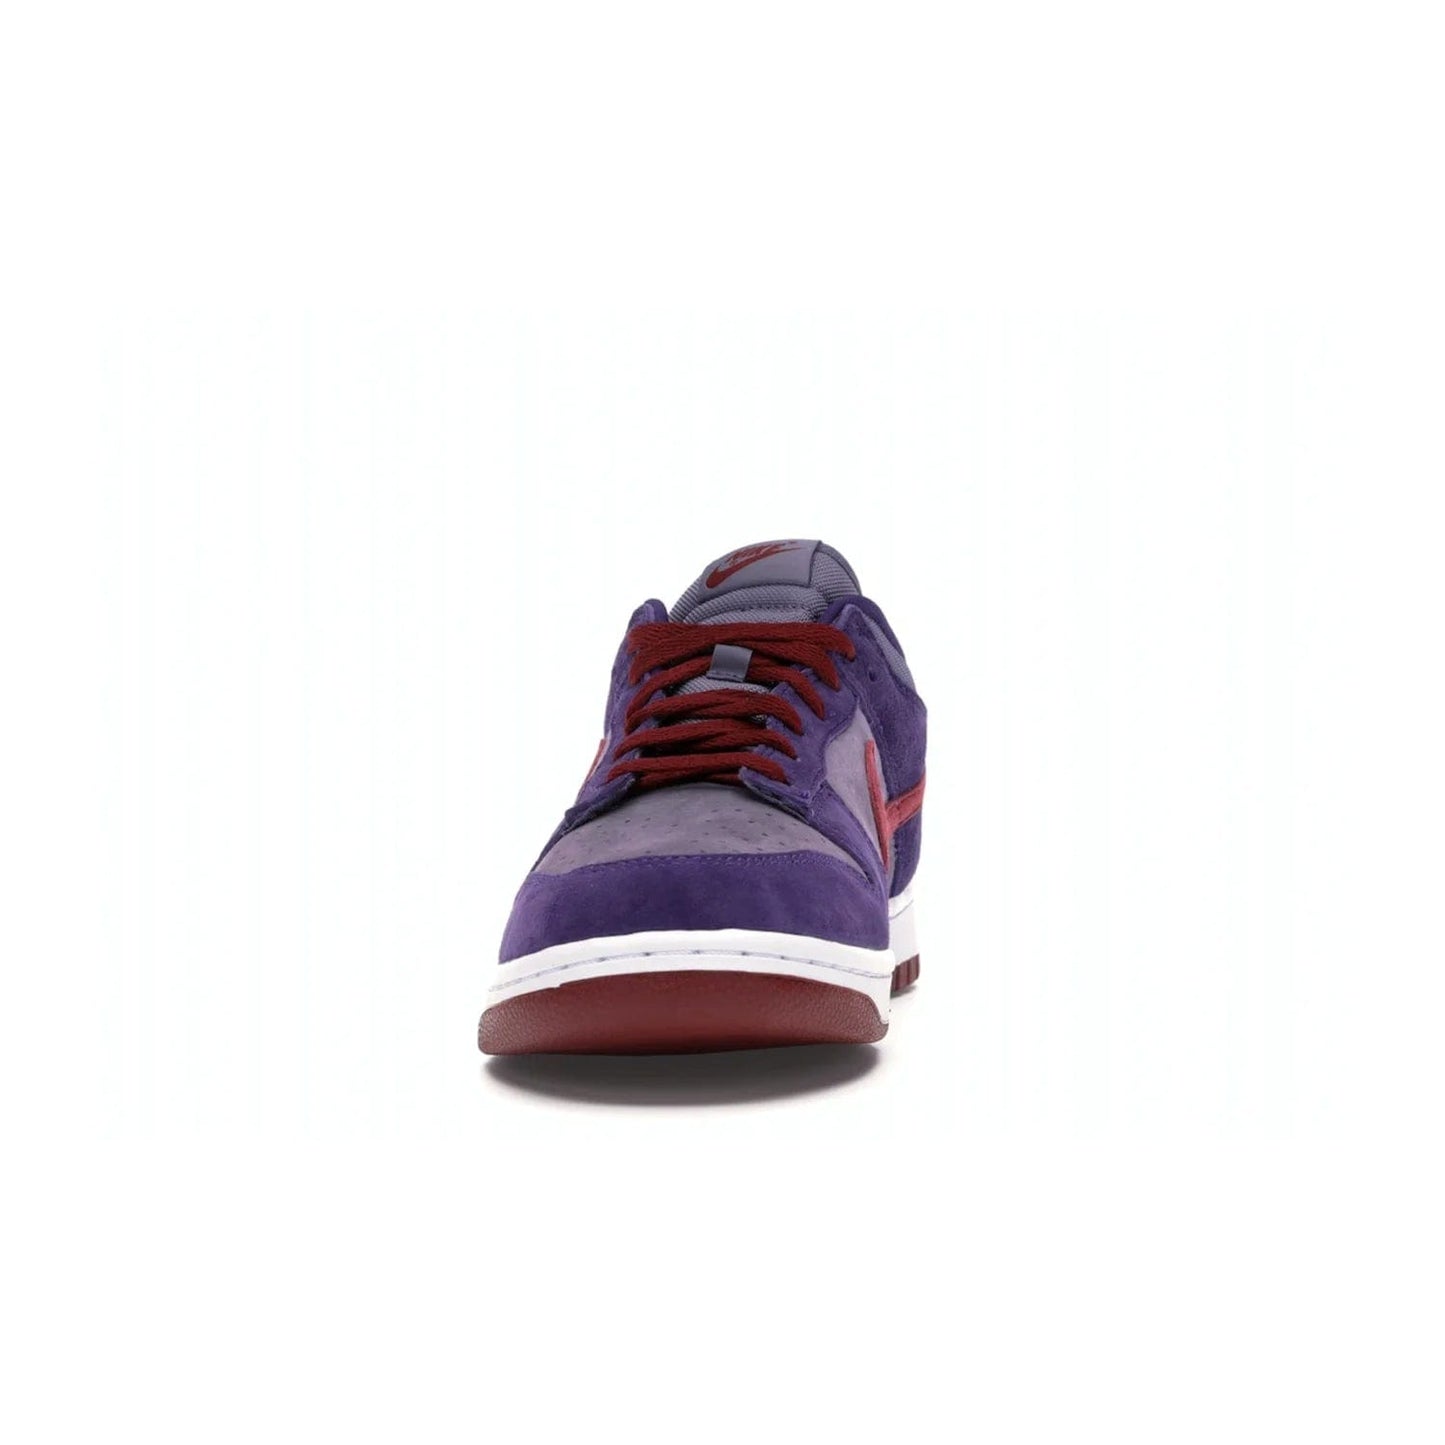 Nike Dunk Low Plum (2020) - Image 11 - Only at www.BallersClubKickz.com - Elevate your look with the Nike Dunk Low Plum (2020). Featuring a bold purple colorway, this retro-inspired silhouette is constructed of premium suede and makes for a must-have for any sneakerhead.